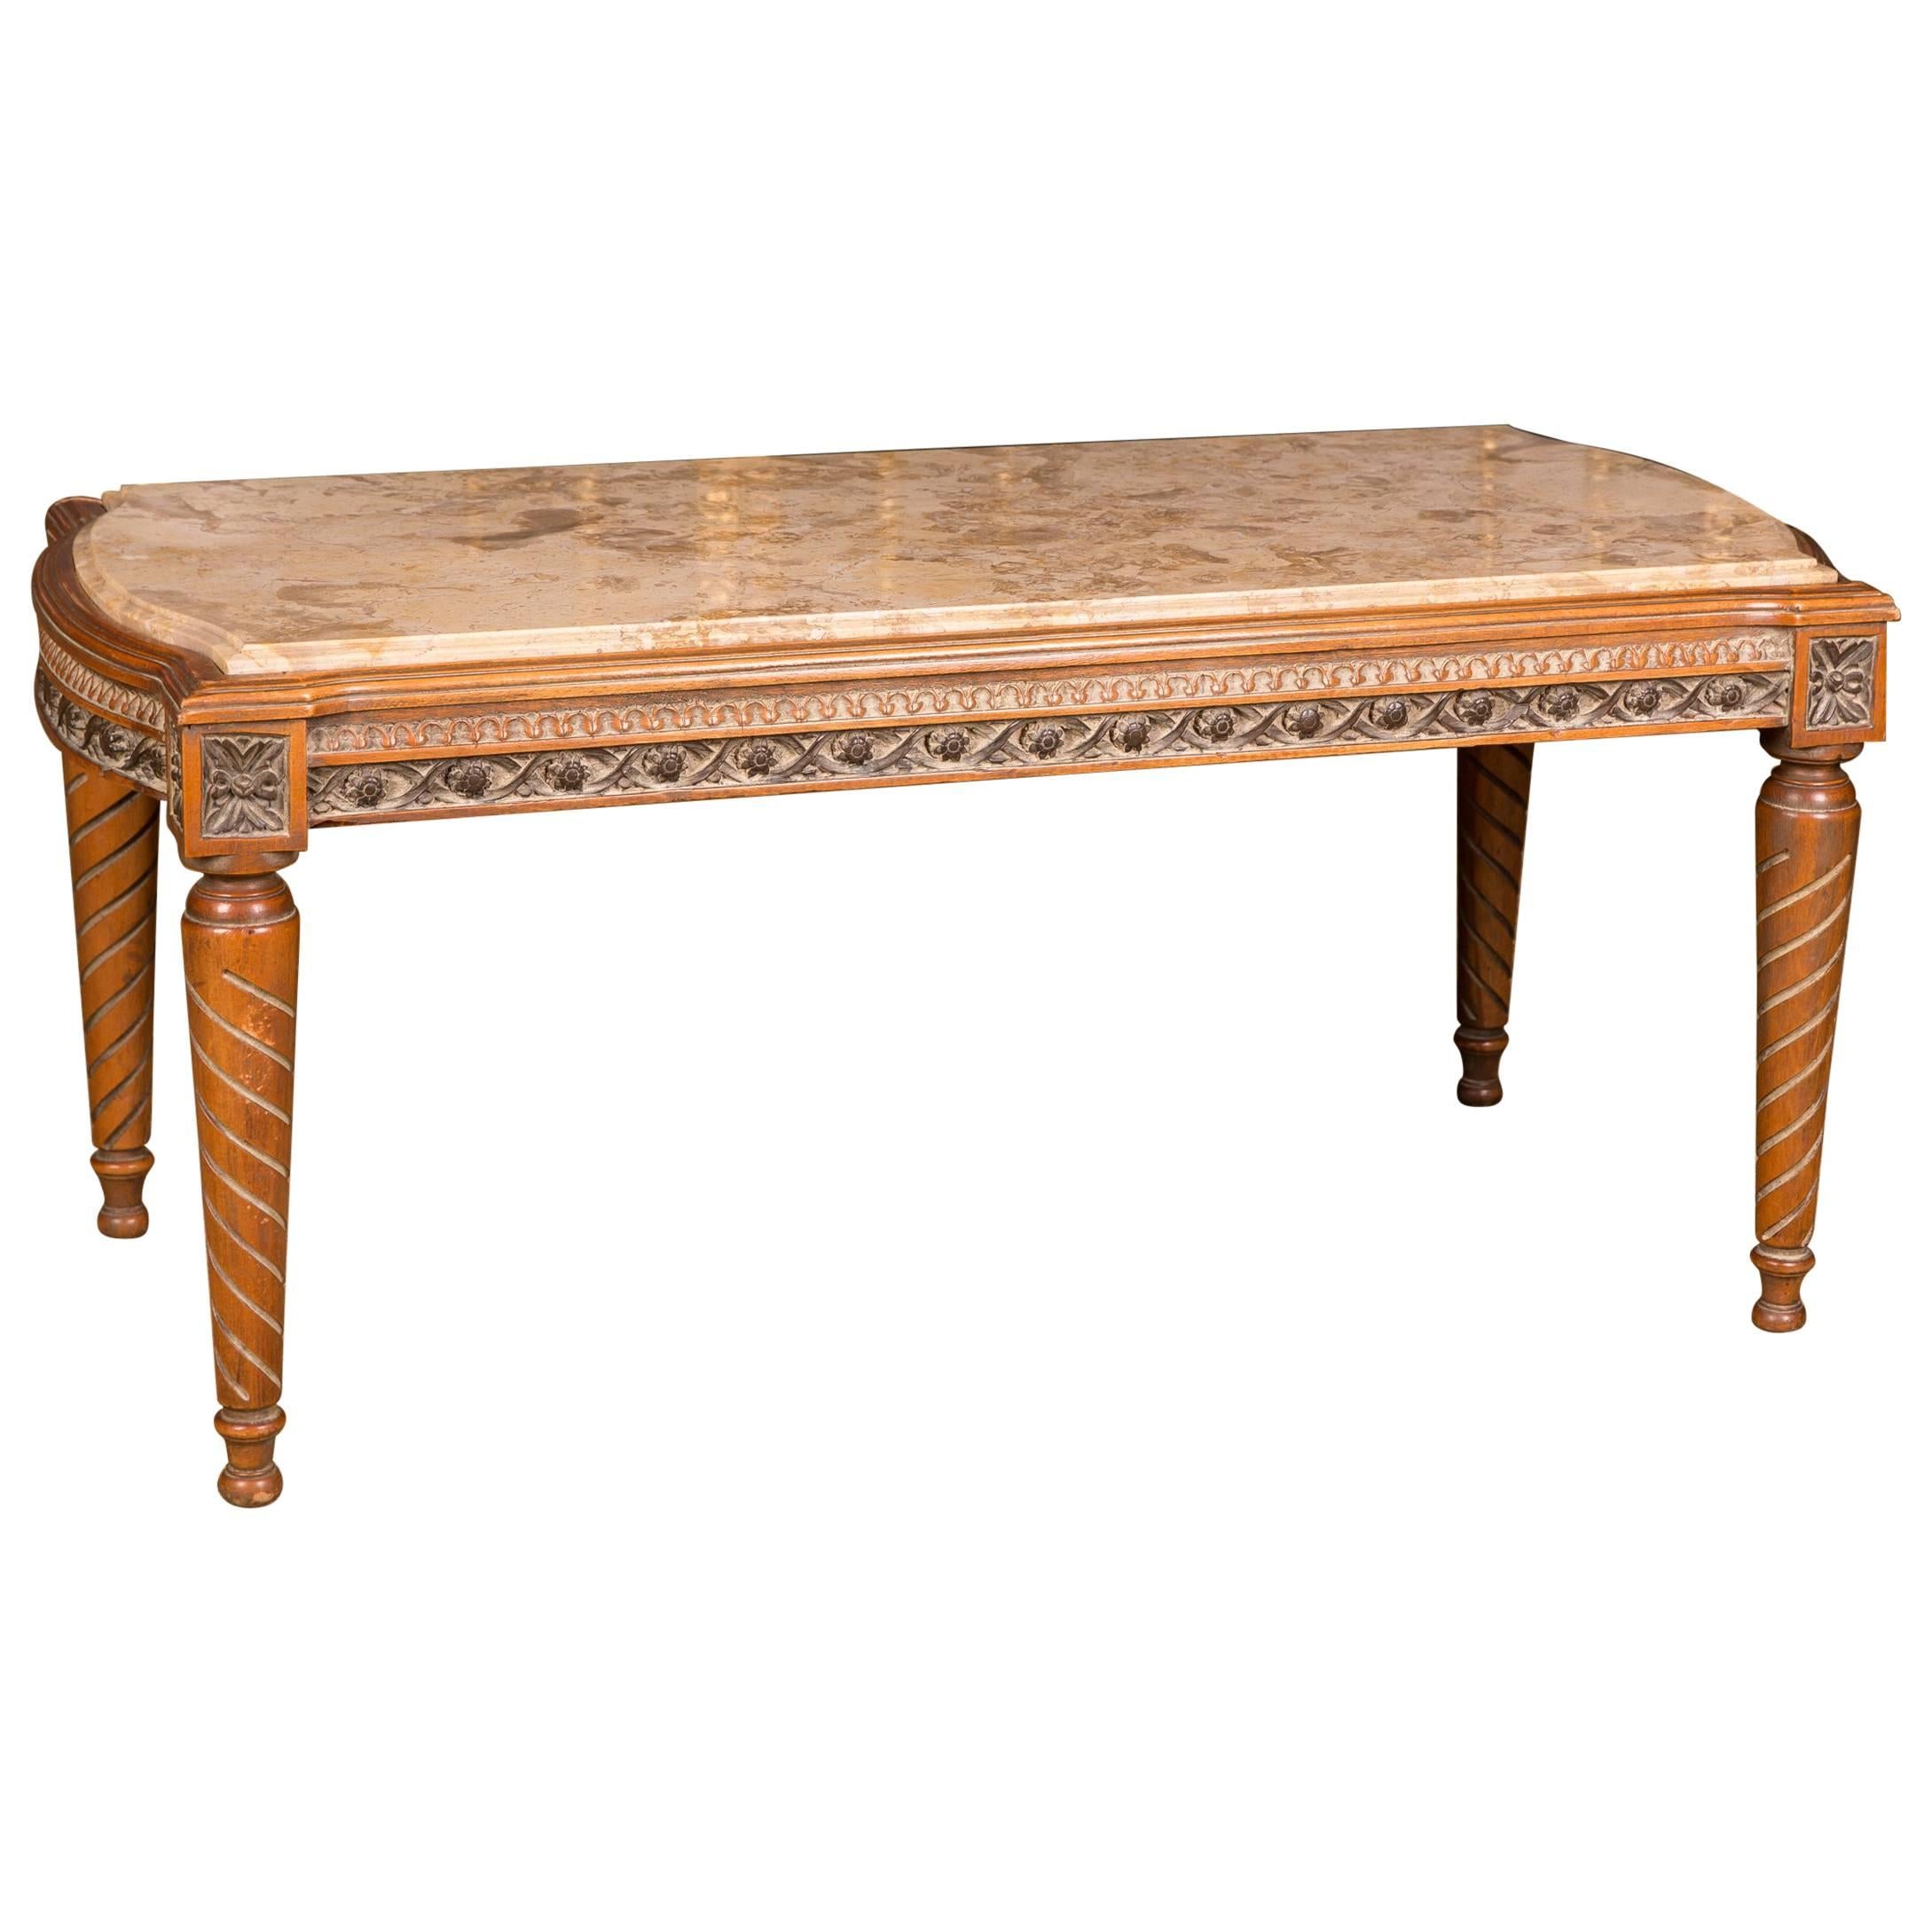 High Quality Table with Marble Top in Louis Seize Style